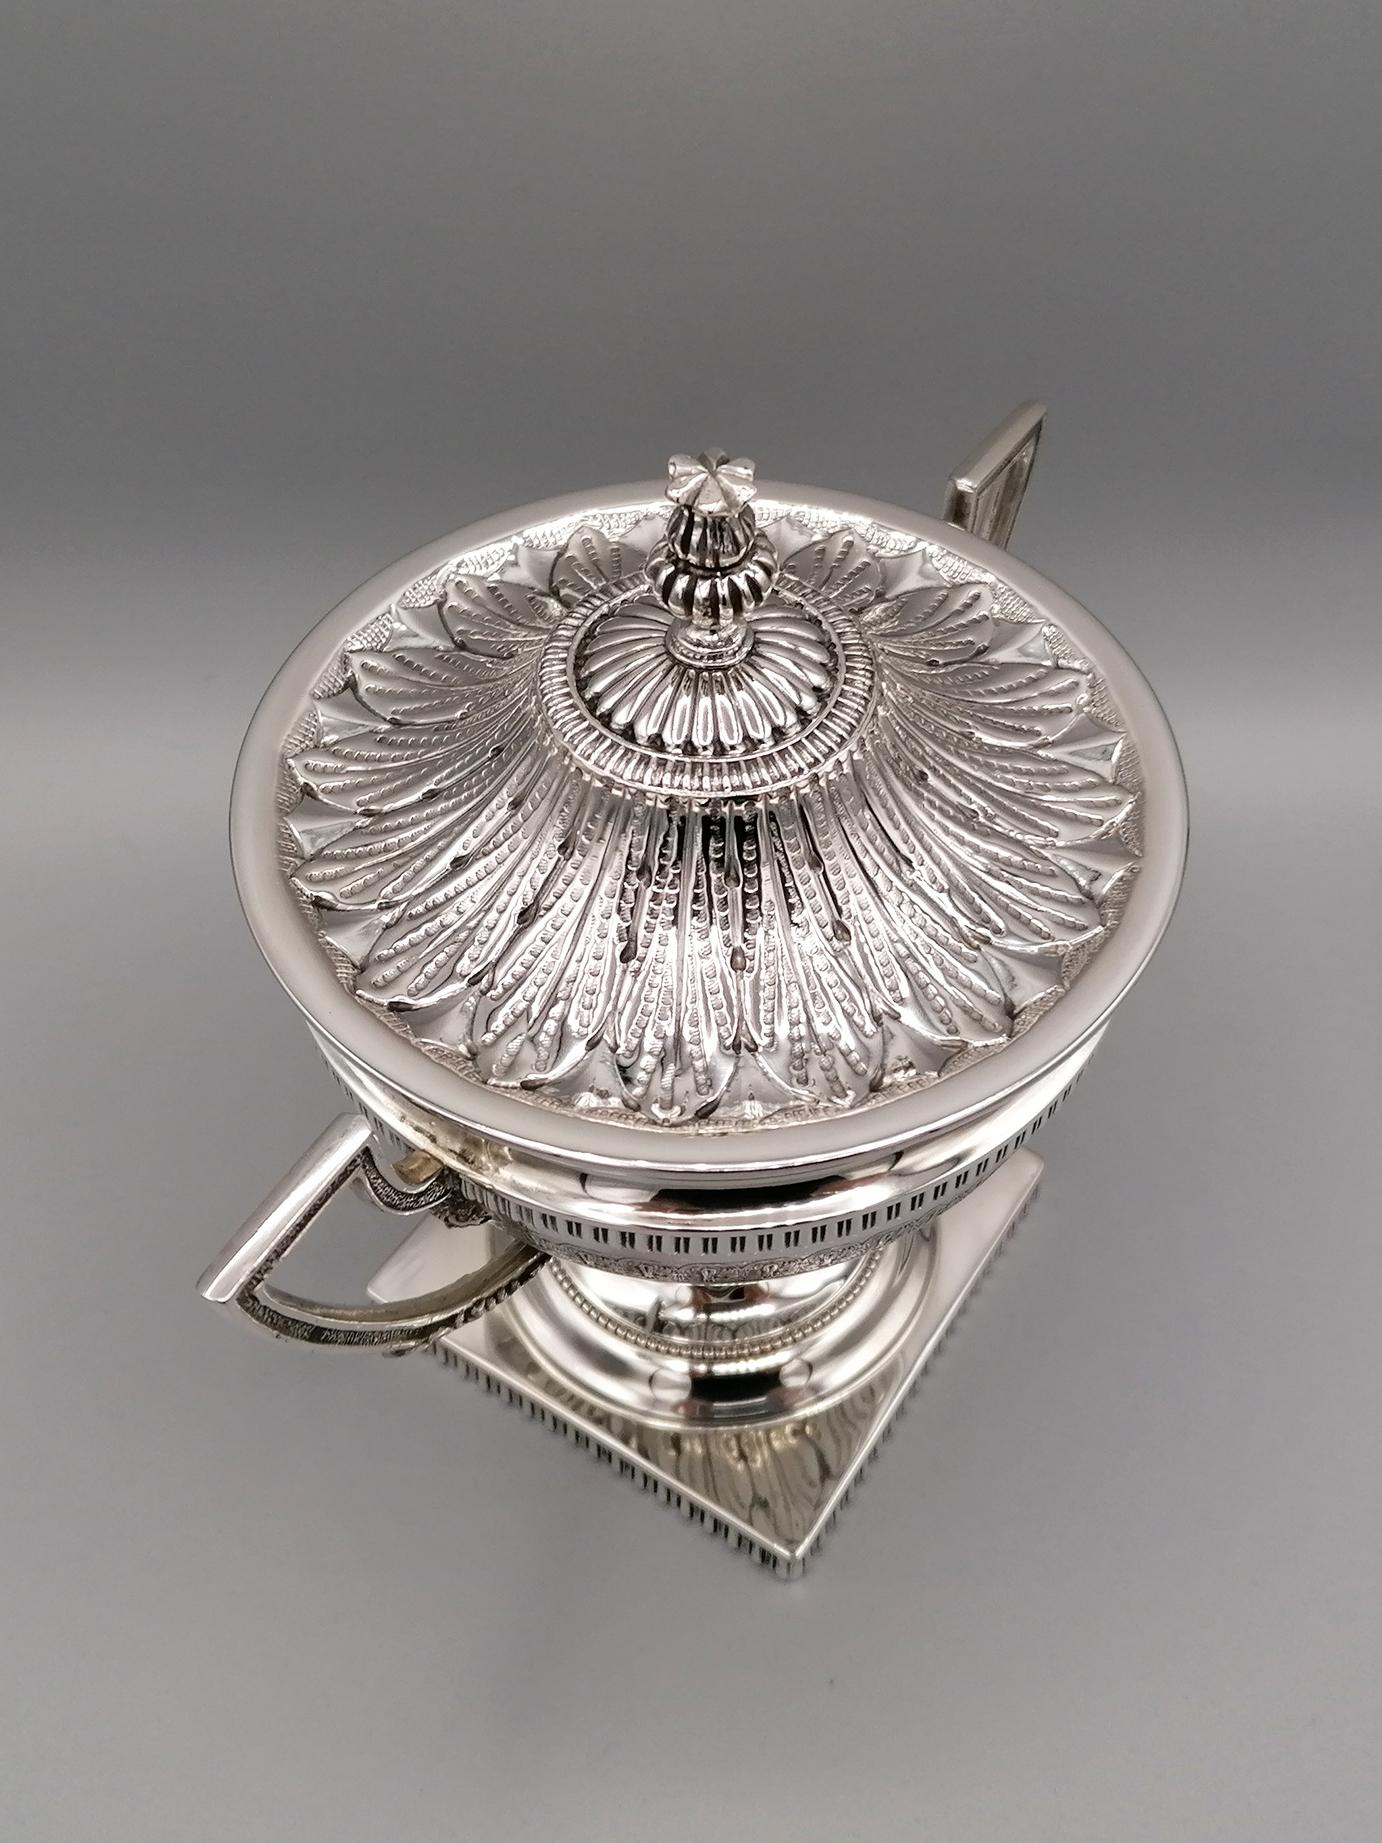 Cast 20th Century Italian Solid Silver Empire Style Sugar Bowl on Feet For Sale